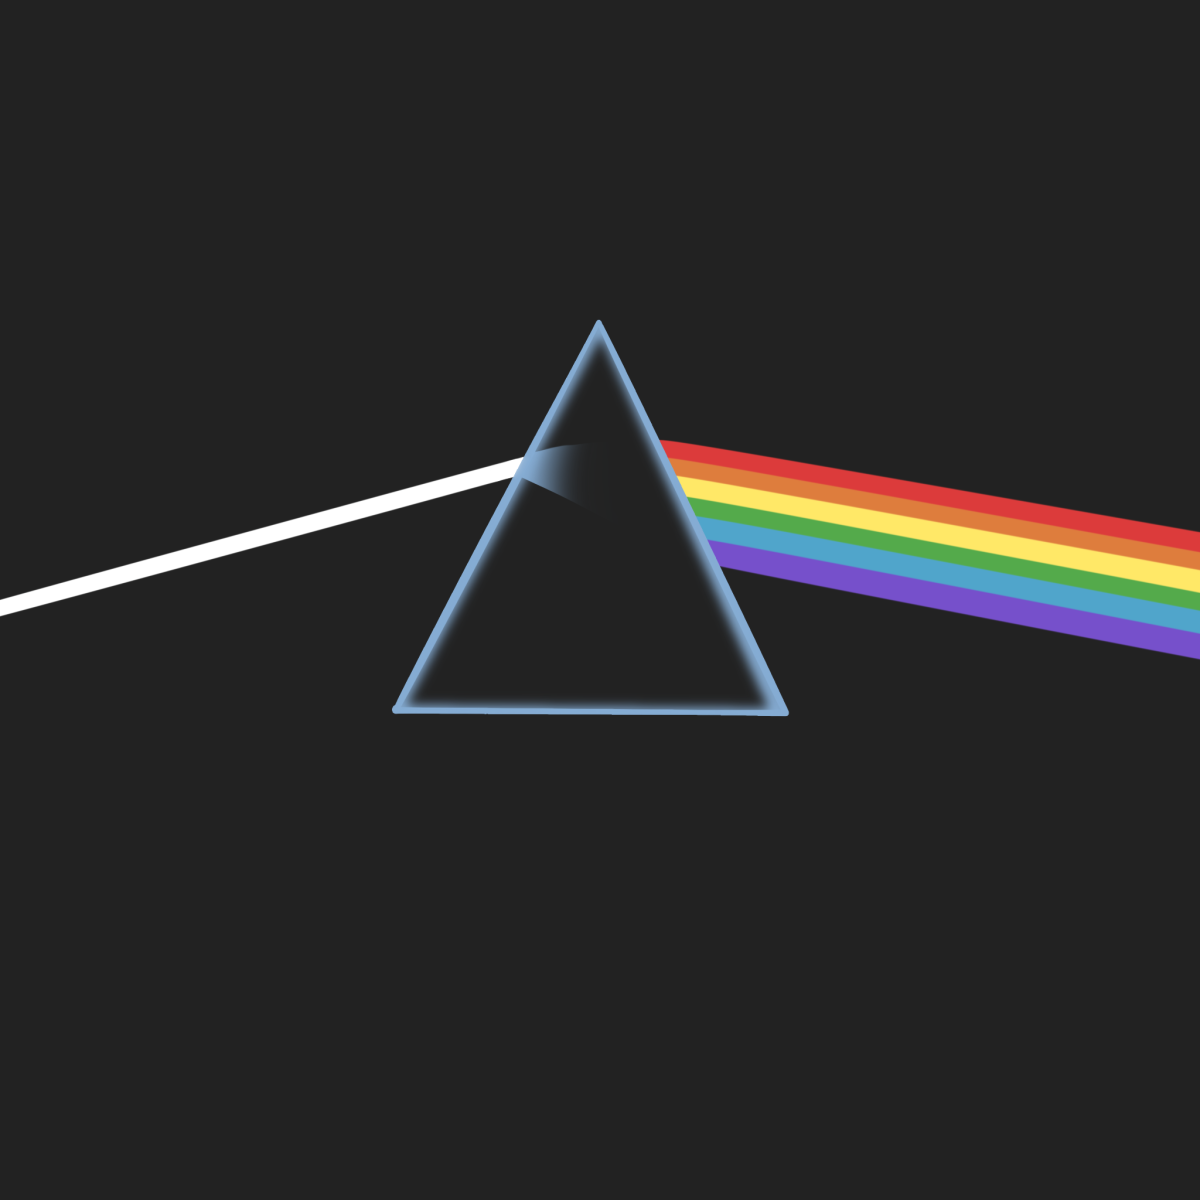 Pink Floyds The Dark Side of the Moon album cover features a prismatic light spectrum, a phenomenon that occurs when white light is passed through a prism. Pink Floyds keyboardist Richard Wright wanted a simple and bold design that would represent the albums themes.